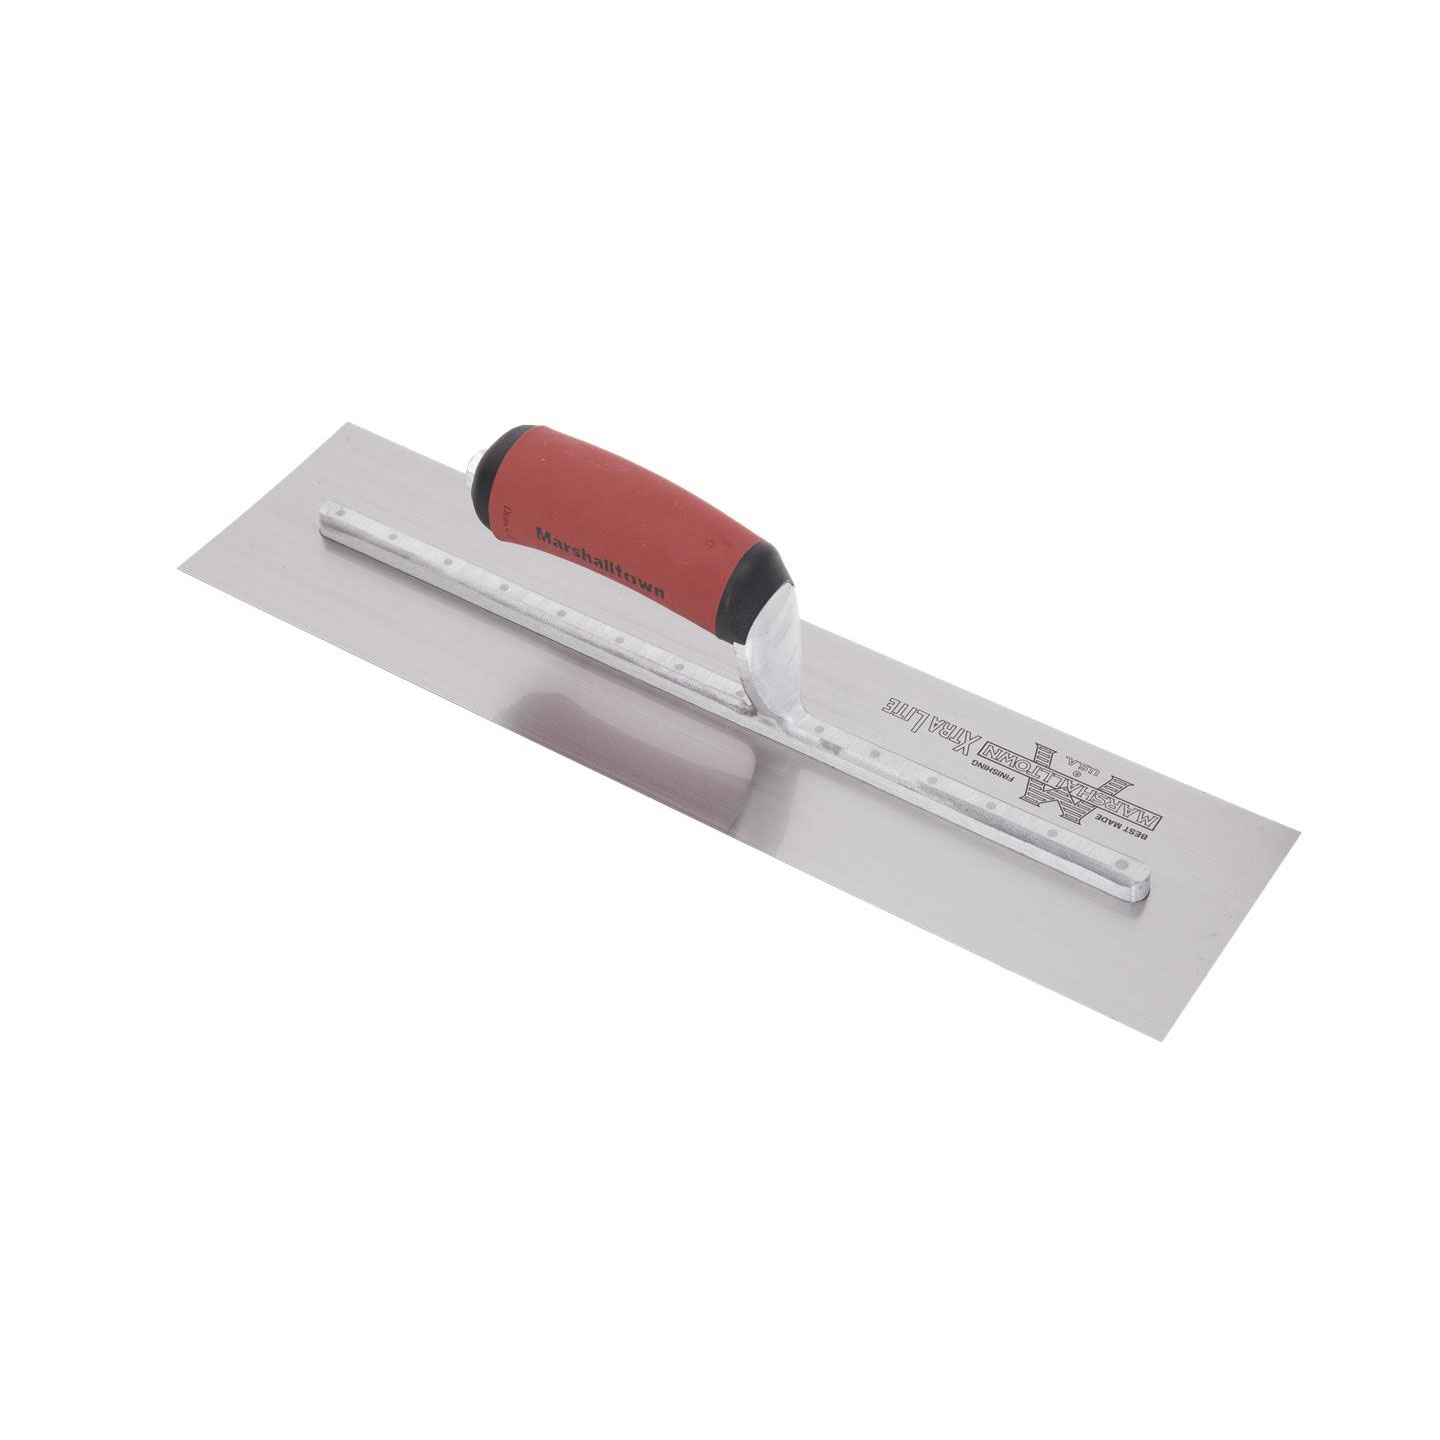 Marshalltown MXS60D 16in. x 3in. High Carbon Steel Finishing Trowel with DuraSoft MAT-MXS60D